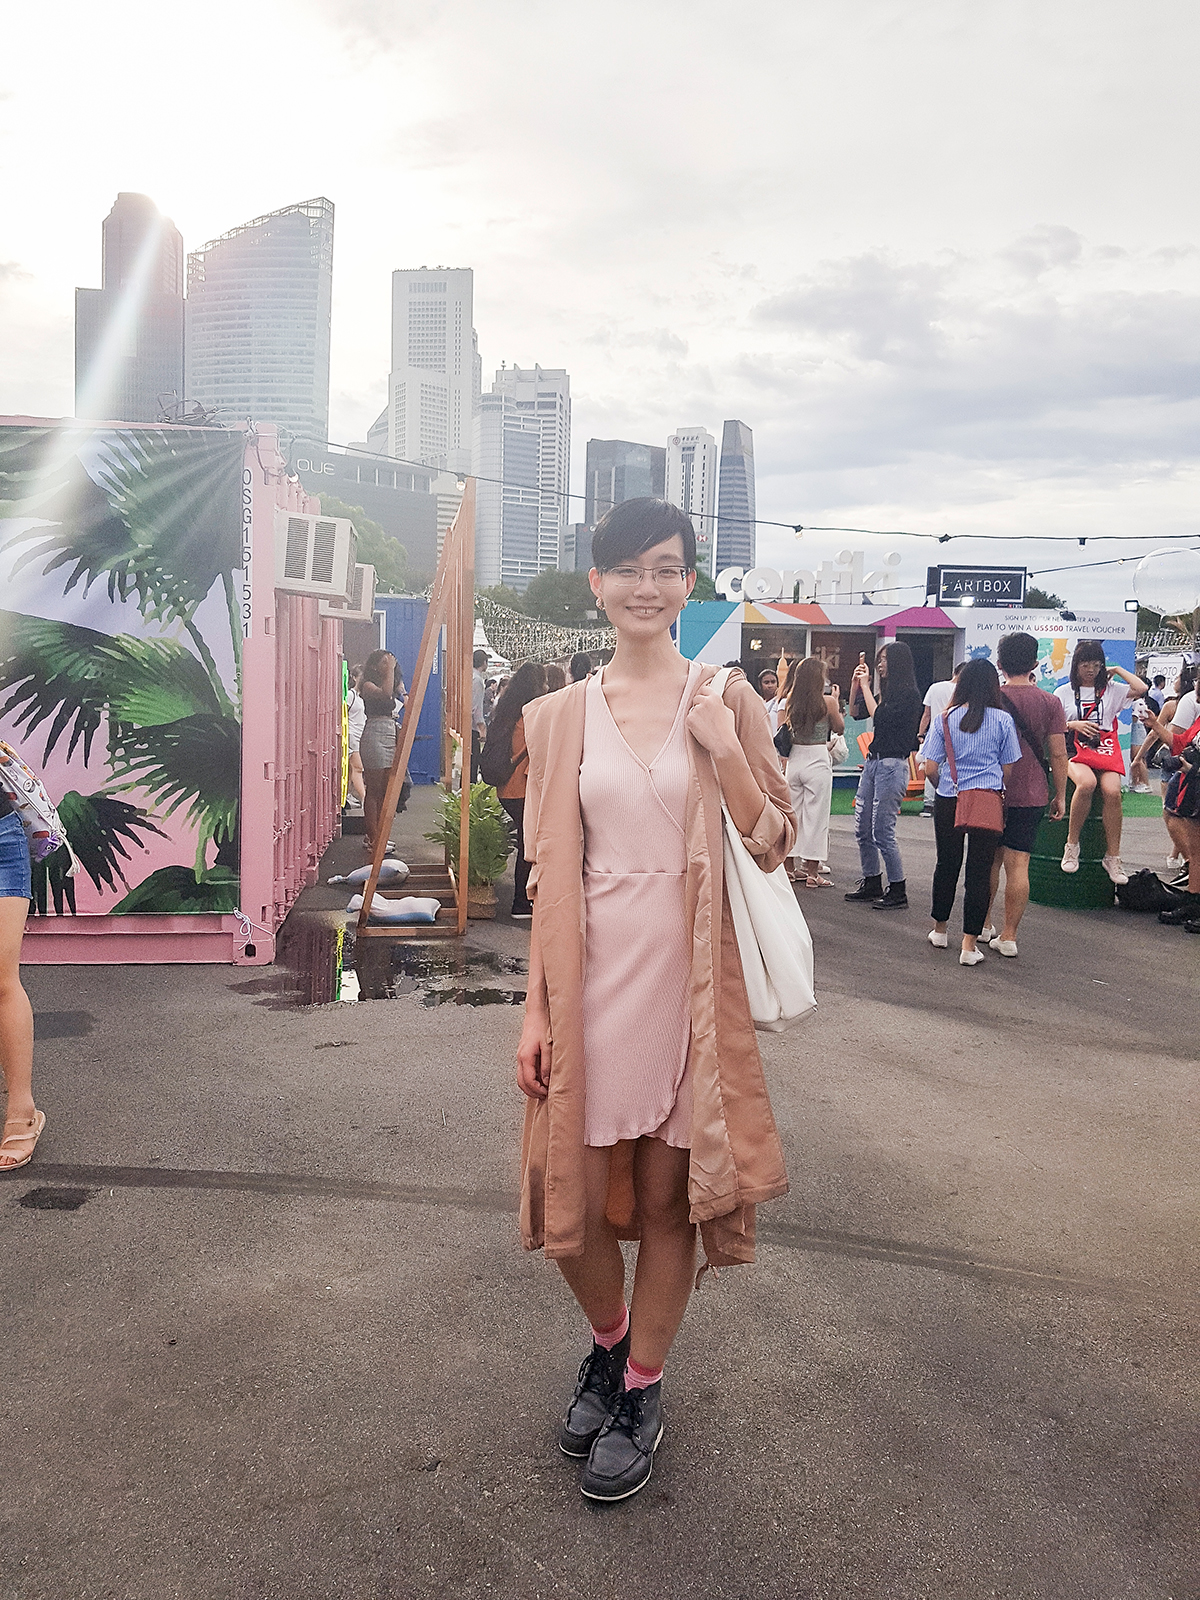 Outfit at Wefie with Kooling at Artbox Singapore 2018.